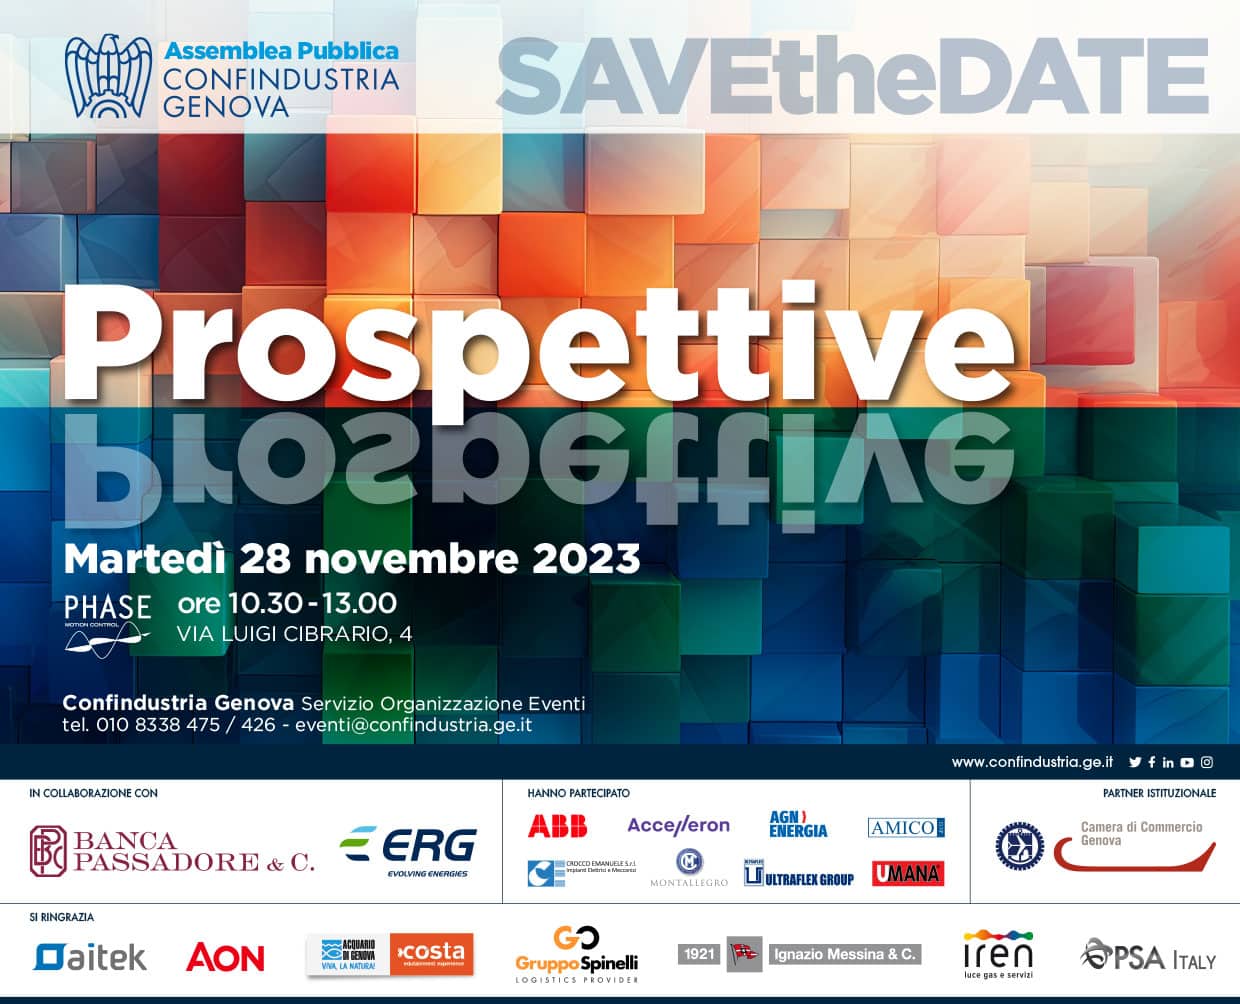 The Public Assembly of the Association, entitled “Perspectives“, will take place on November 28th, starting at 10.30 am, at the Phase Motion Control headquarters (Genoa, via Pionieri e Aviatori d’Italia 4).